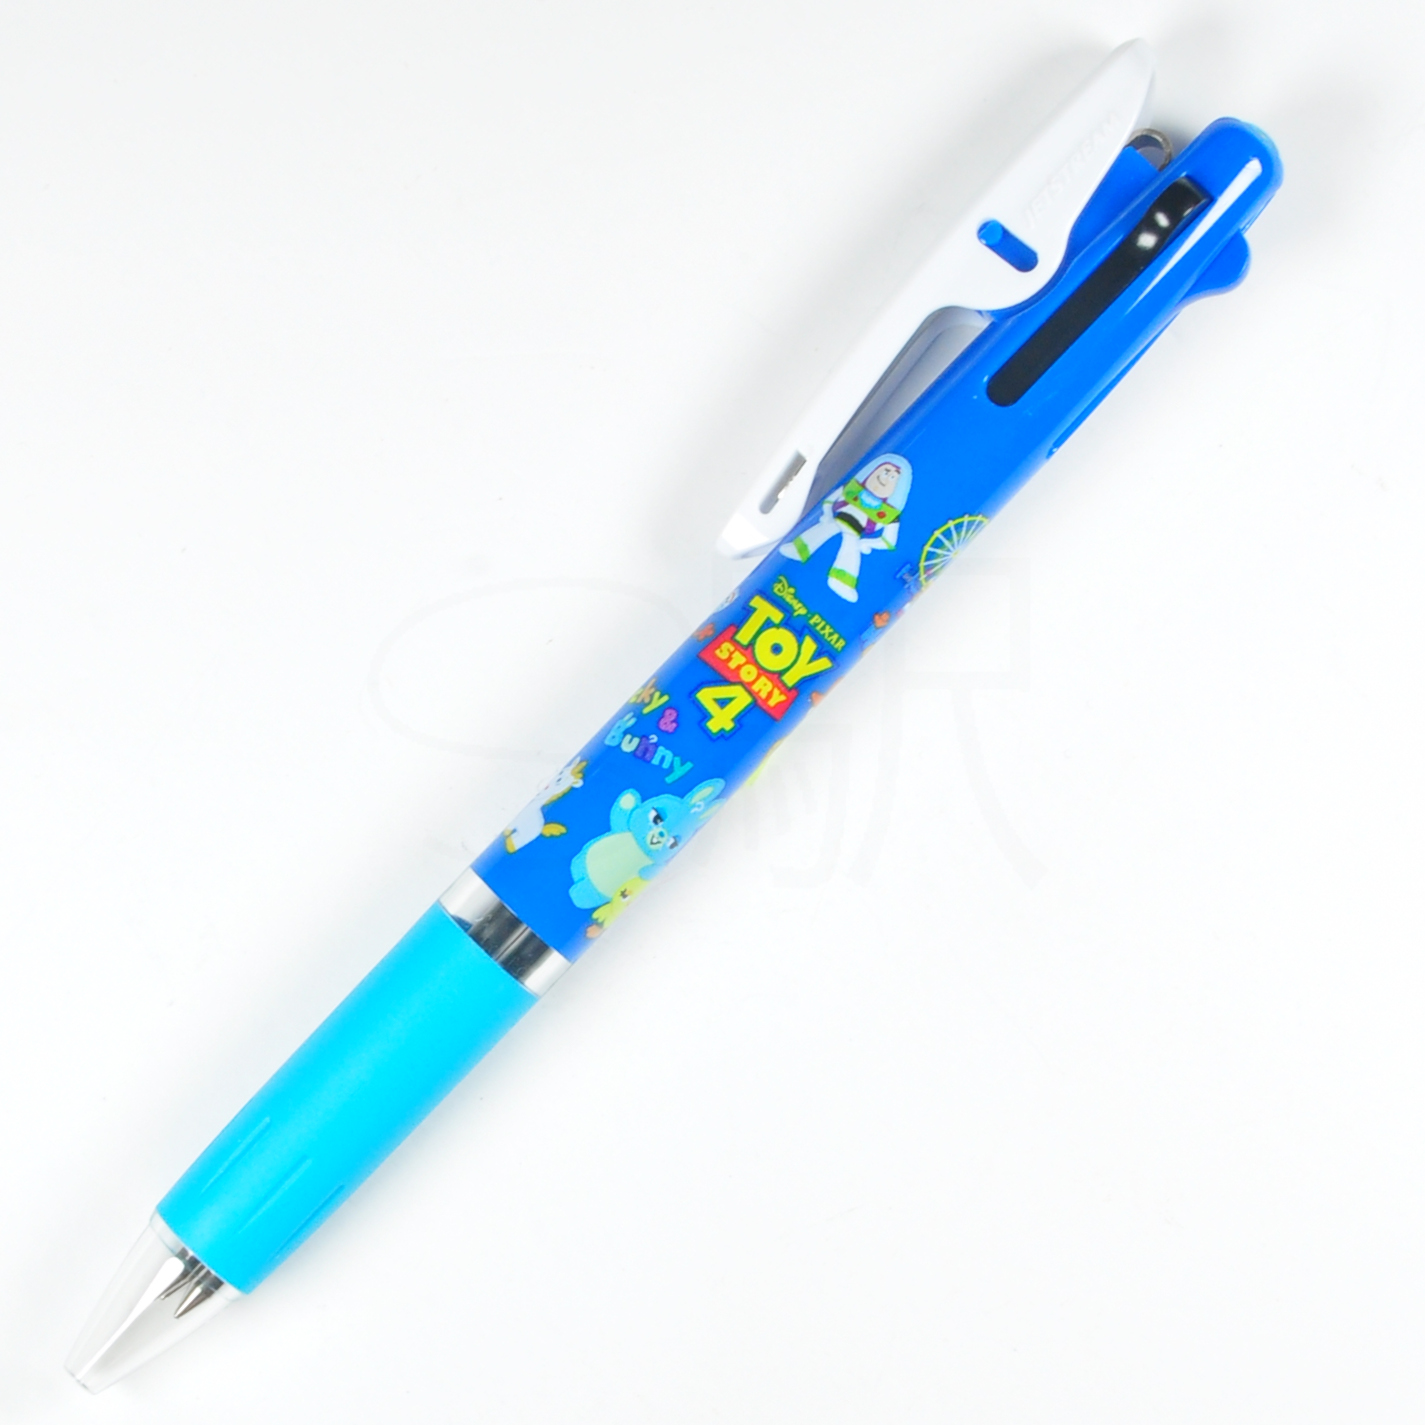 https://stationerystation515.com/image/catalog/Products/Pens%20and%20Pencils/Jetsteam/Disney/Uni-Jetstream-3-Color-Pen-Holder-with-Refills-x-CUTE-MODEL-Toy-Story-4-4991277176788.jpg